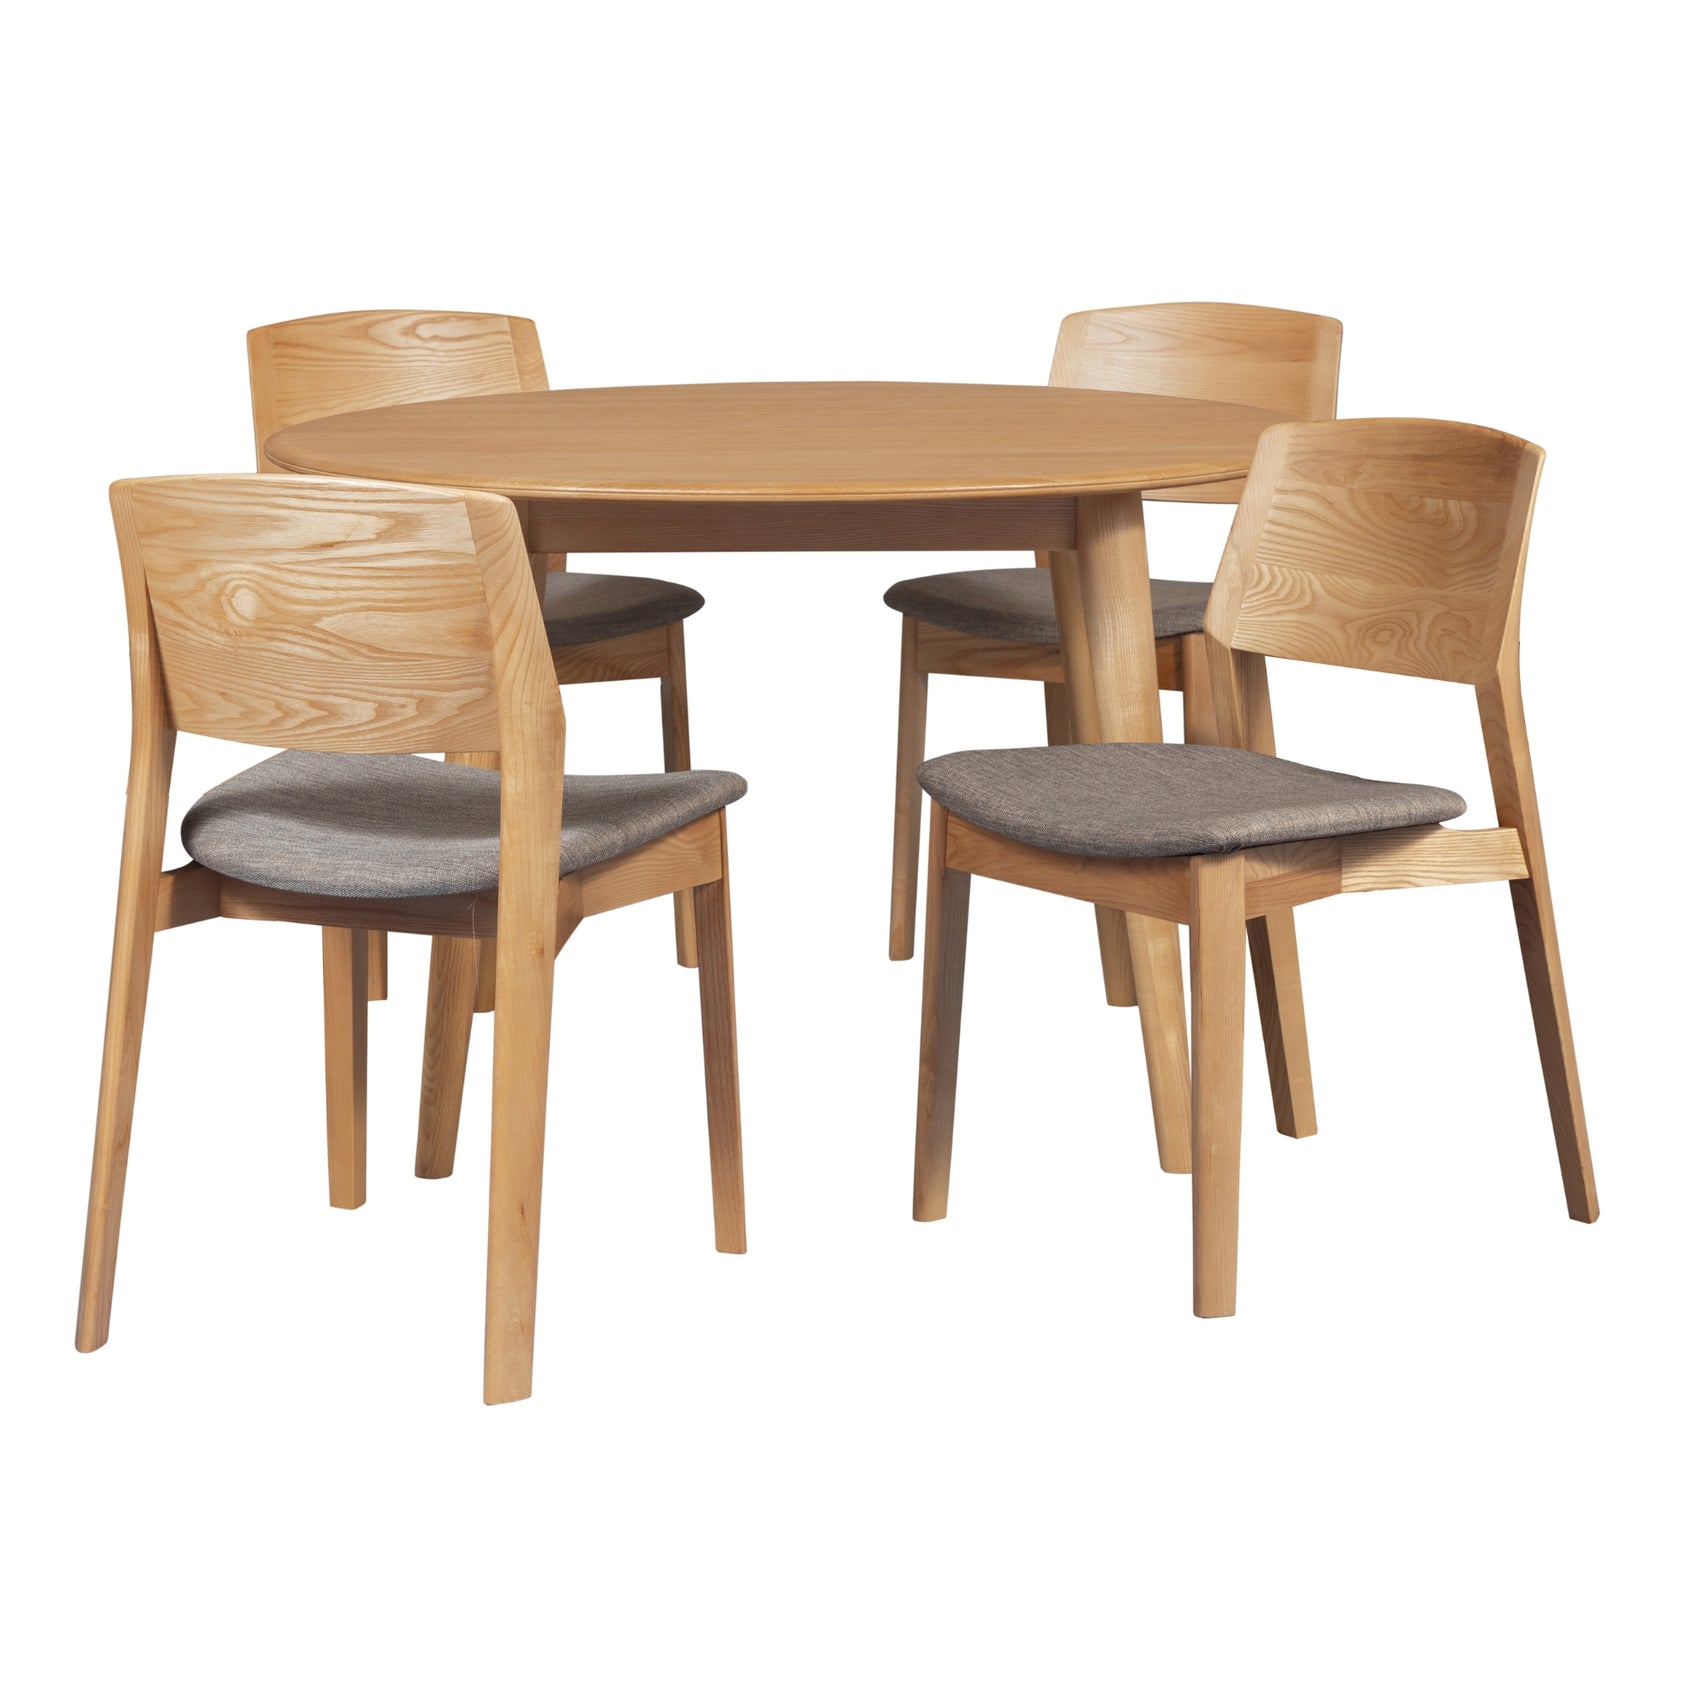 Emilio 5pc 120cm Round Dining Table Set Fabric Chair Solid Ash Wood Oak